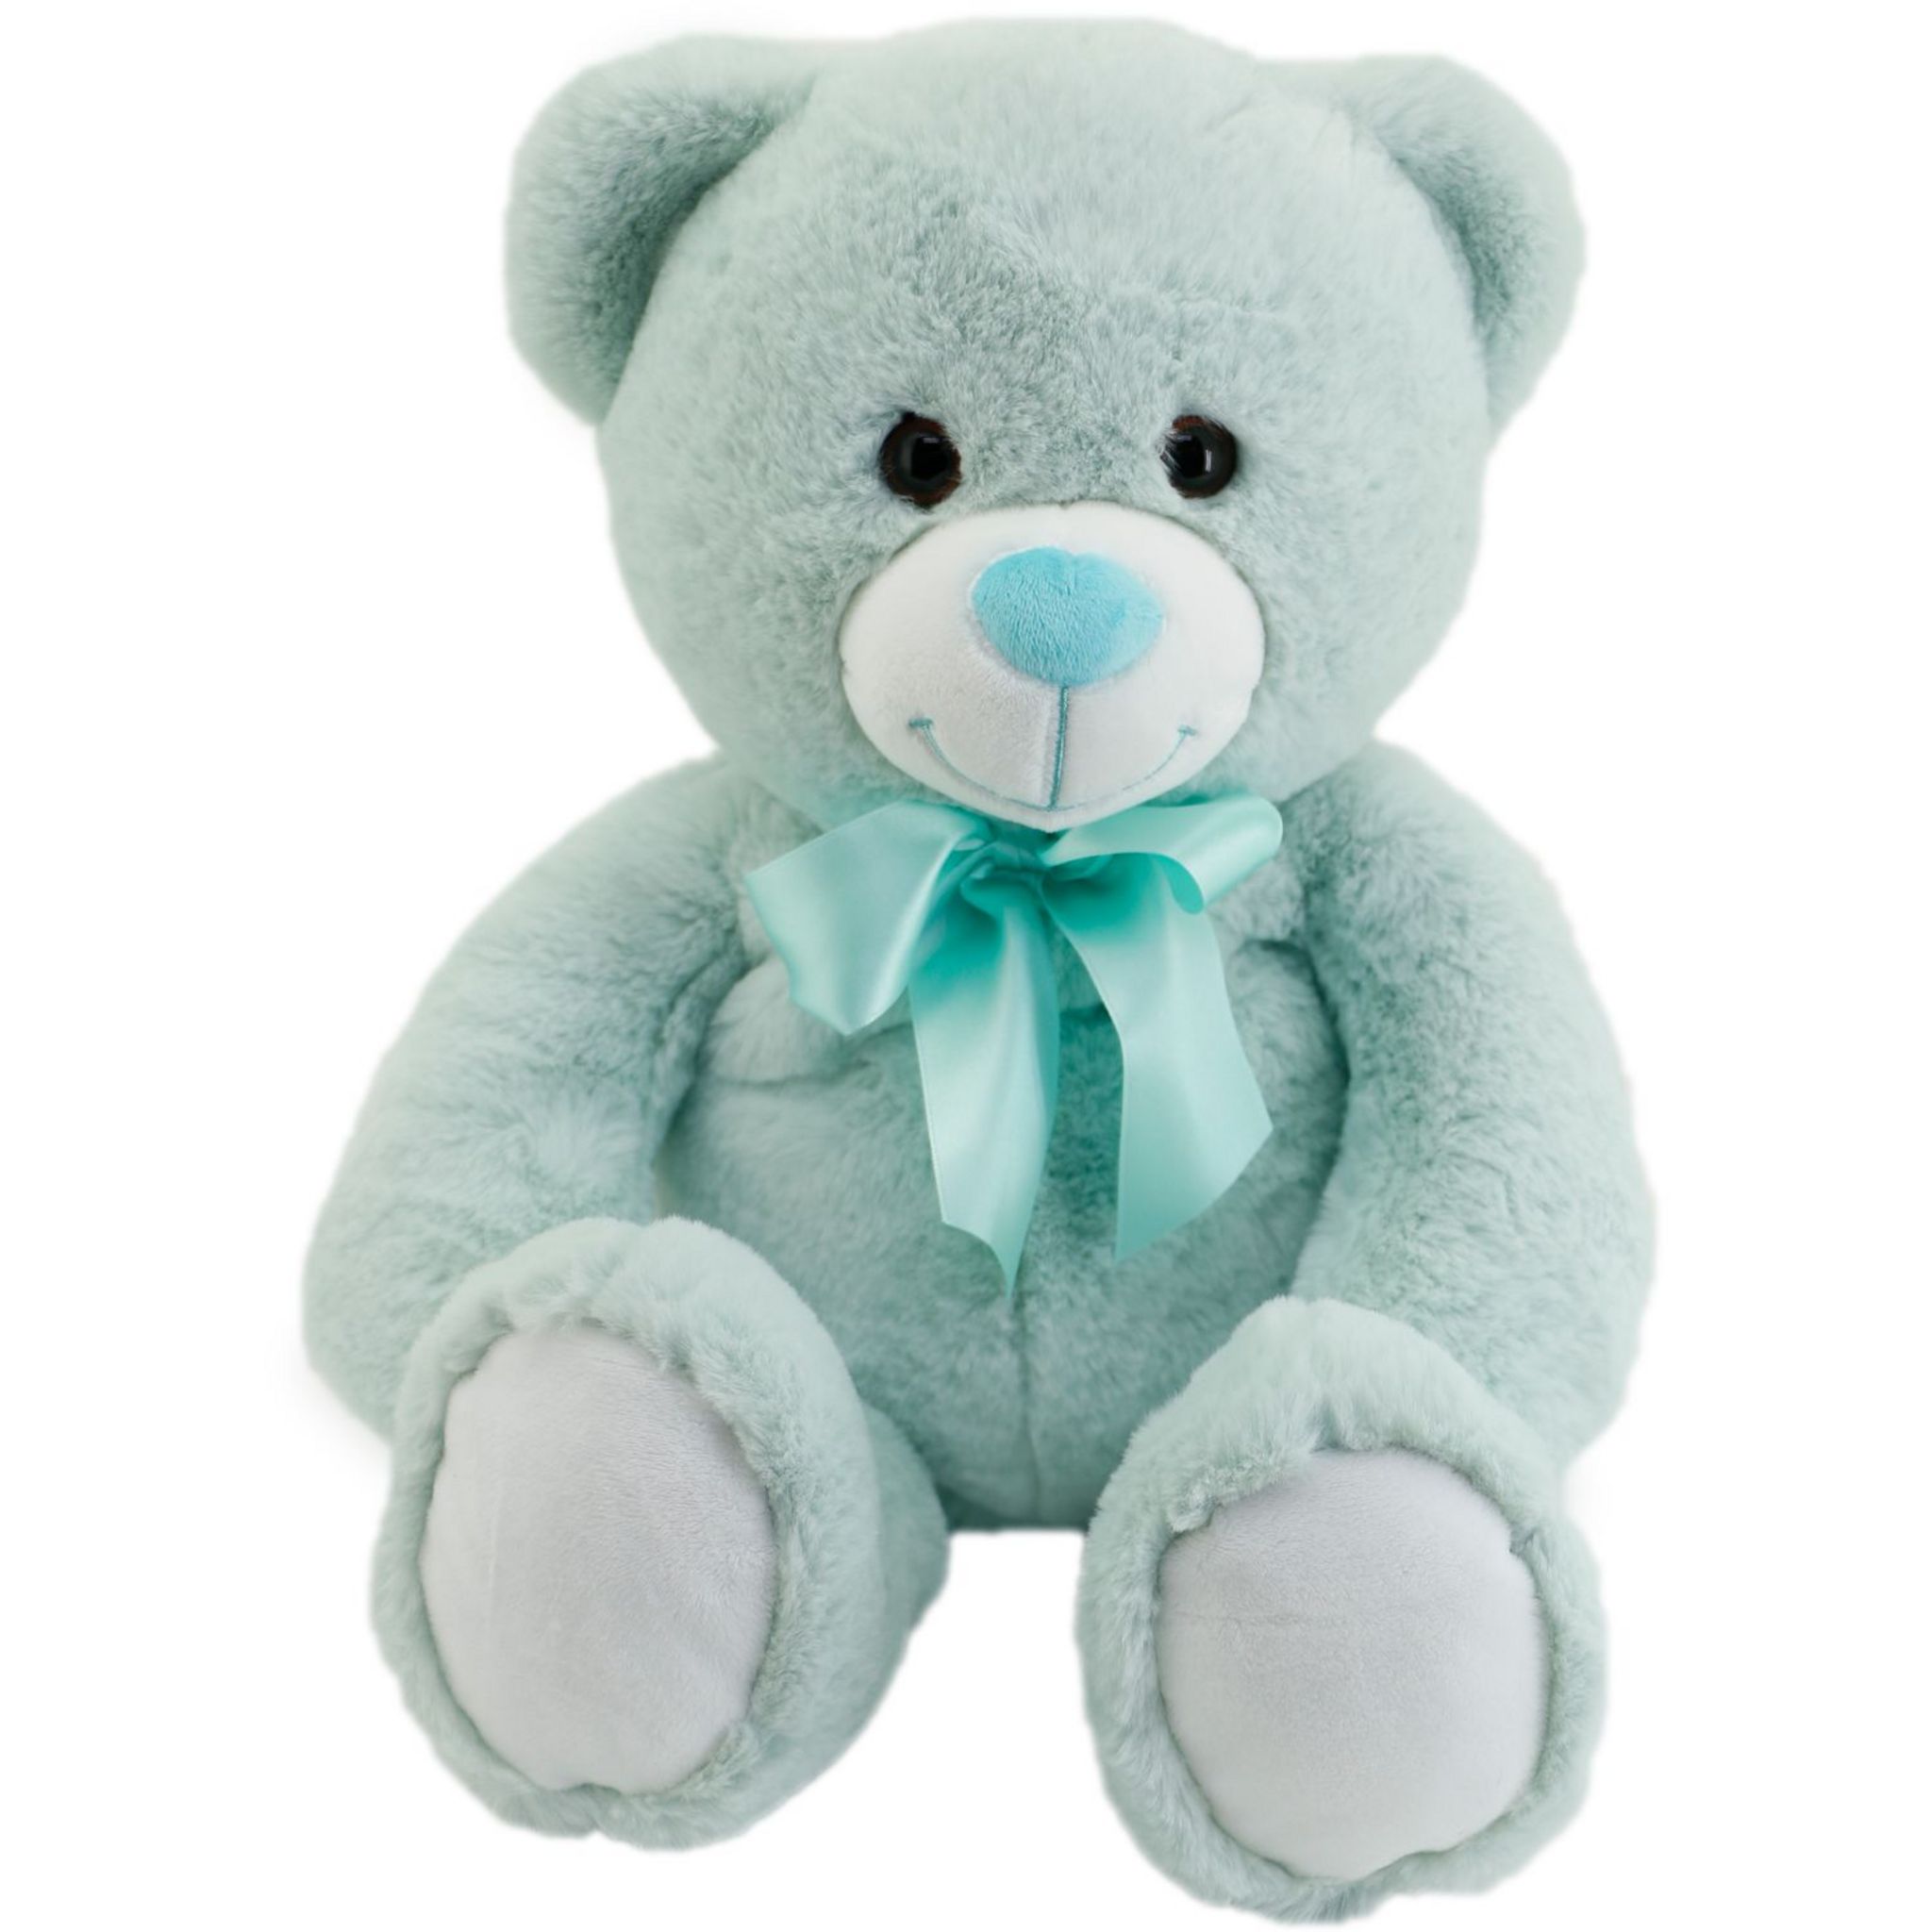 Ours peluche 2 metre - Cdiscount